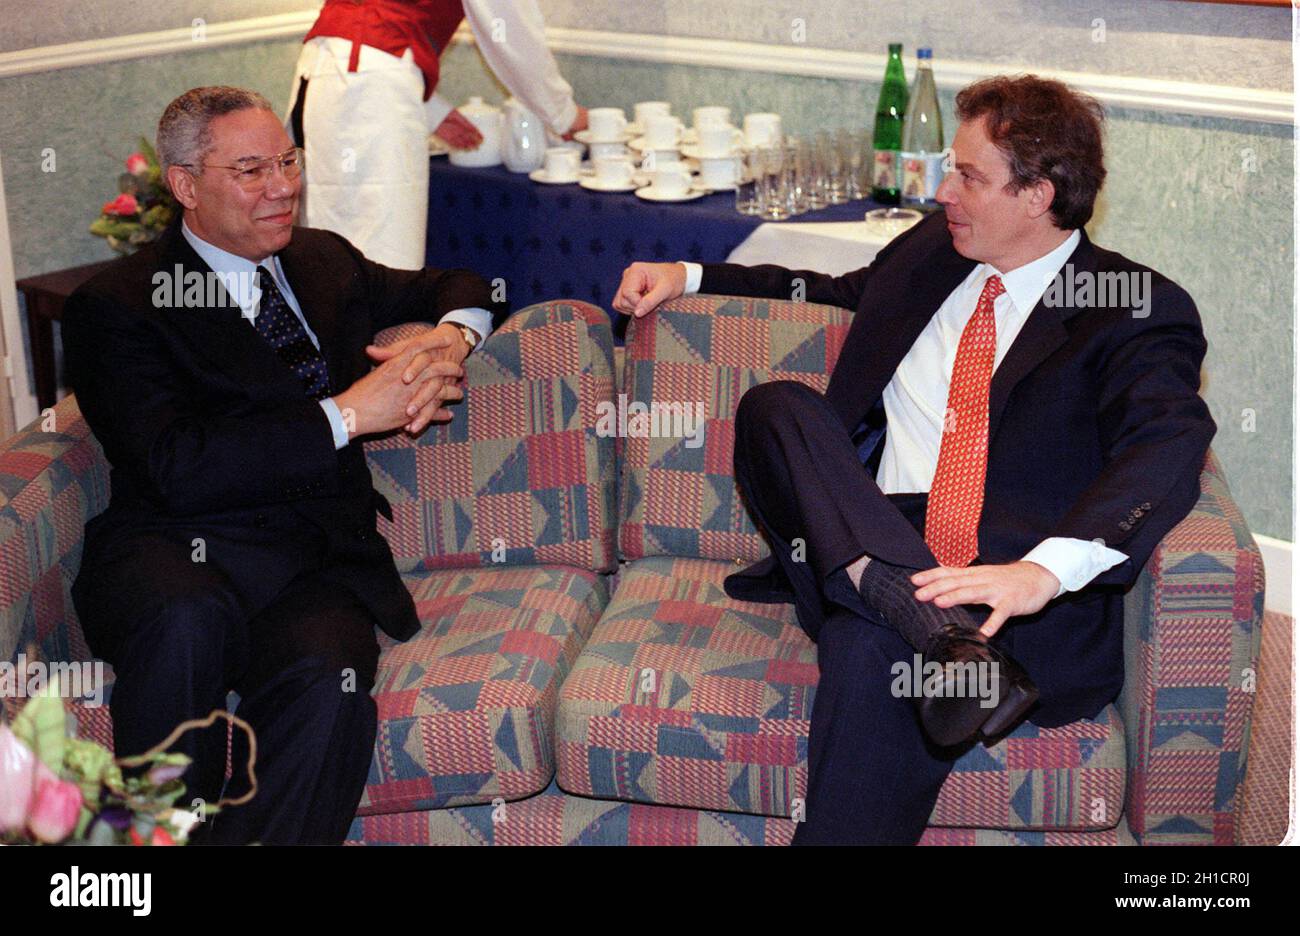 File photo dated 02/03/00 of the then Prime Minister Tony Blair and General Sir Colin Powell in a meeting room at the Active Communities Convention and Celebration in the Wembley Conference Centre. Colin Powell, the former US Joint Chiefs chairman and US secretary of state, has died from Covid-19 complications, his family has said. Issue date: Monday October 18, 2021. Stock Photo